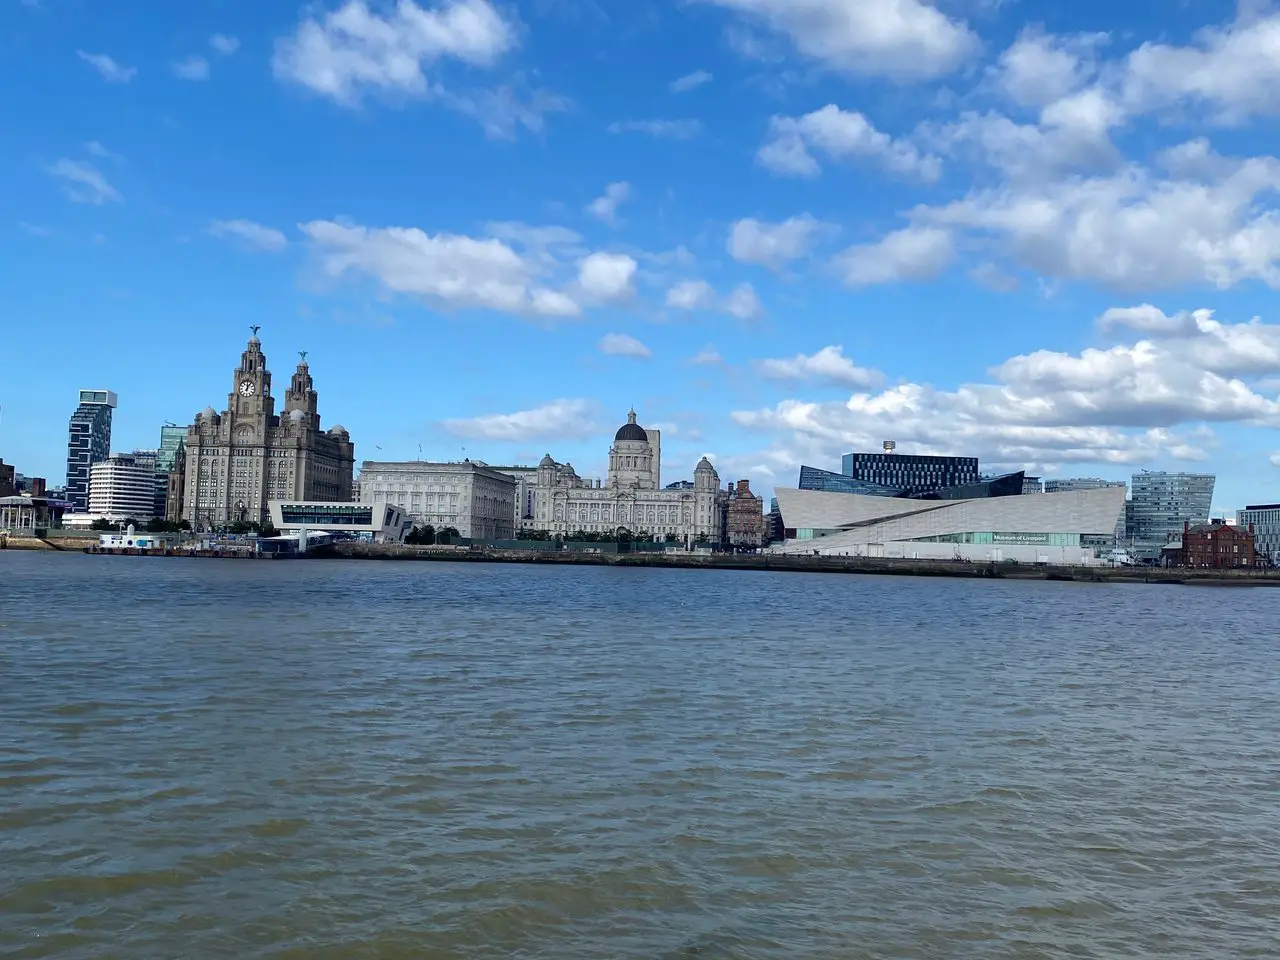 View of Royal Liver Building and Museum of Liverpool from the River Mersey